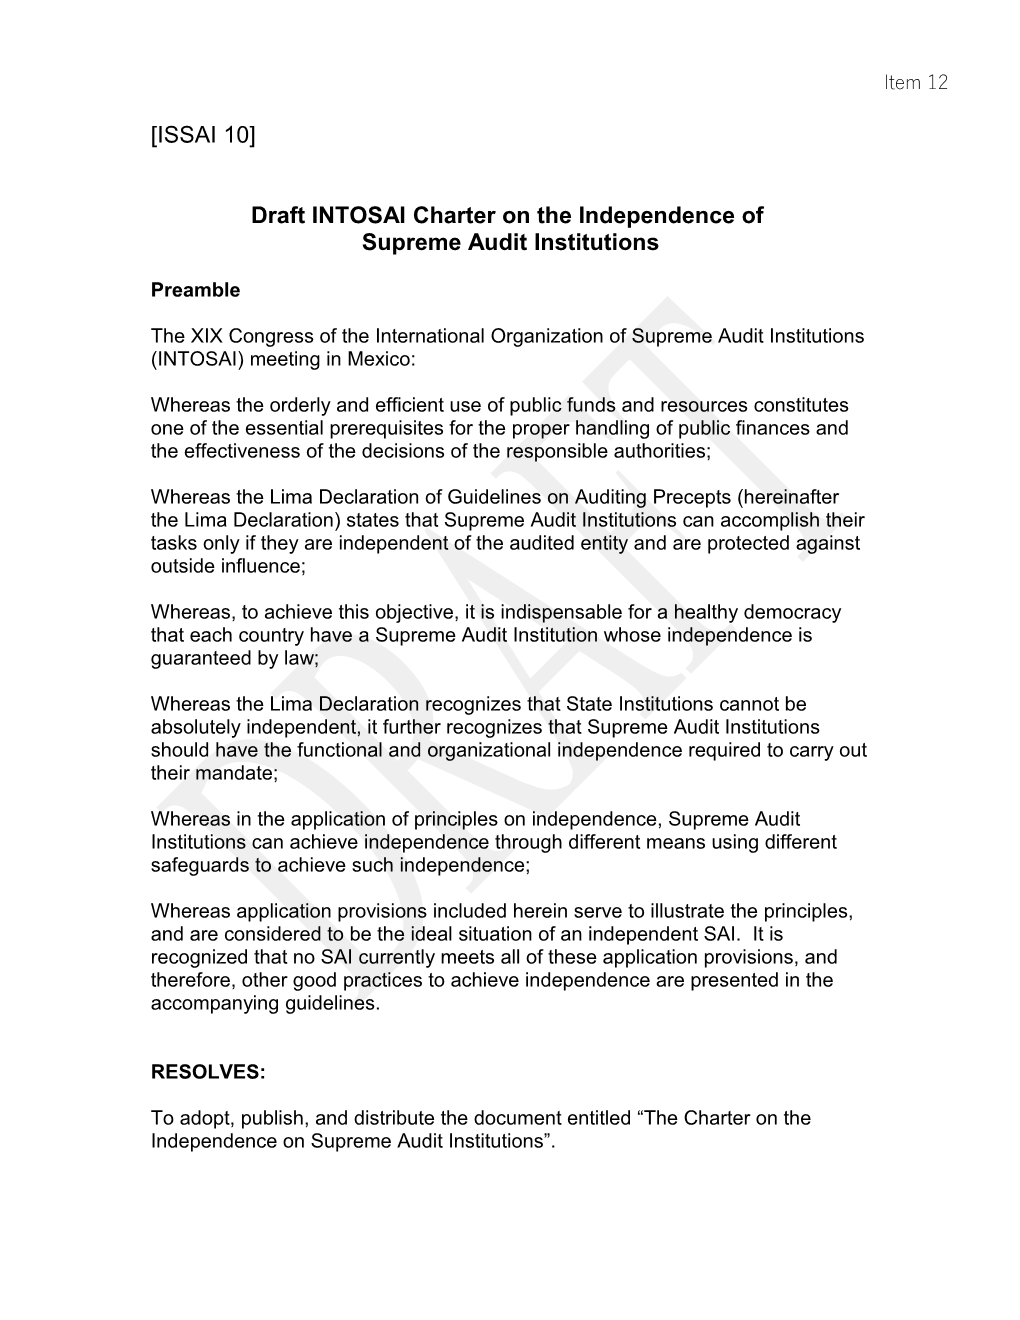 Draft INTOSAI Charter Onthe Independence Of